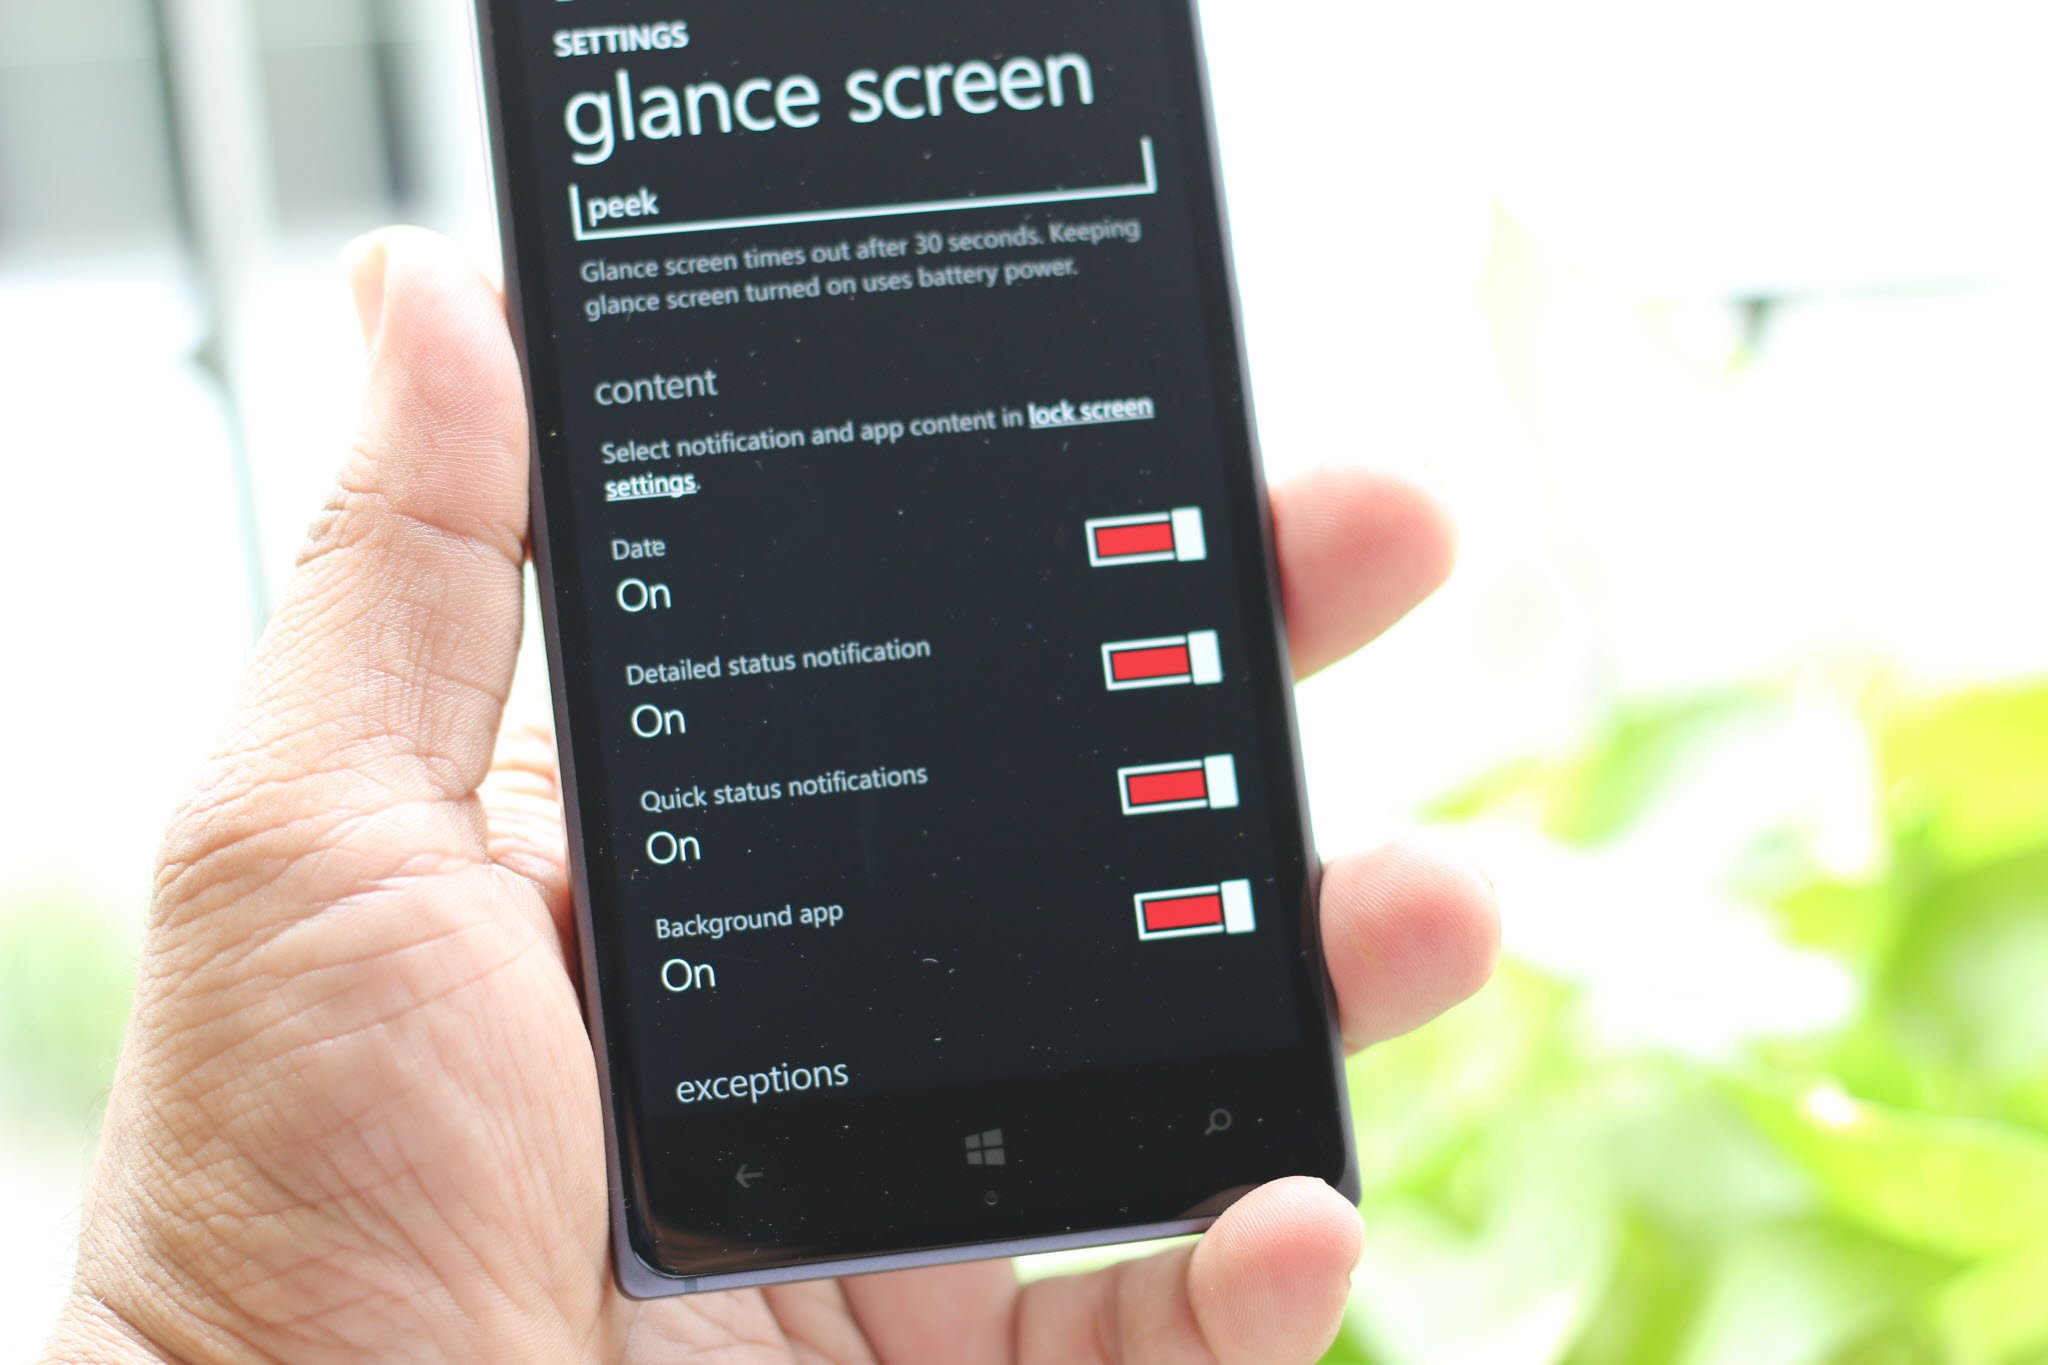 Glance Screen Picks Massive Update; Supports Background Apps, Date